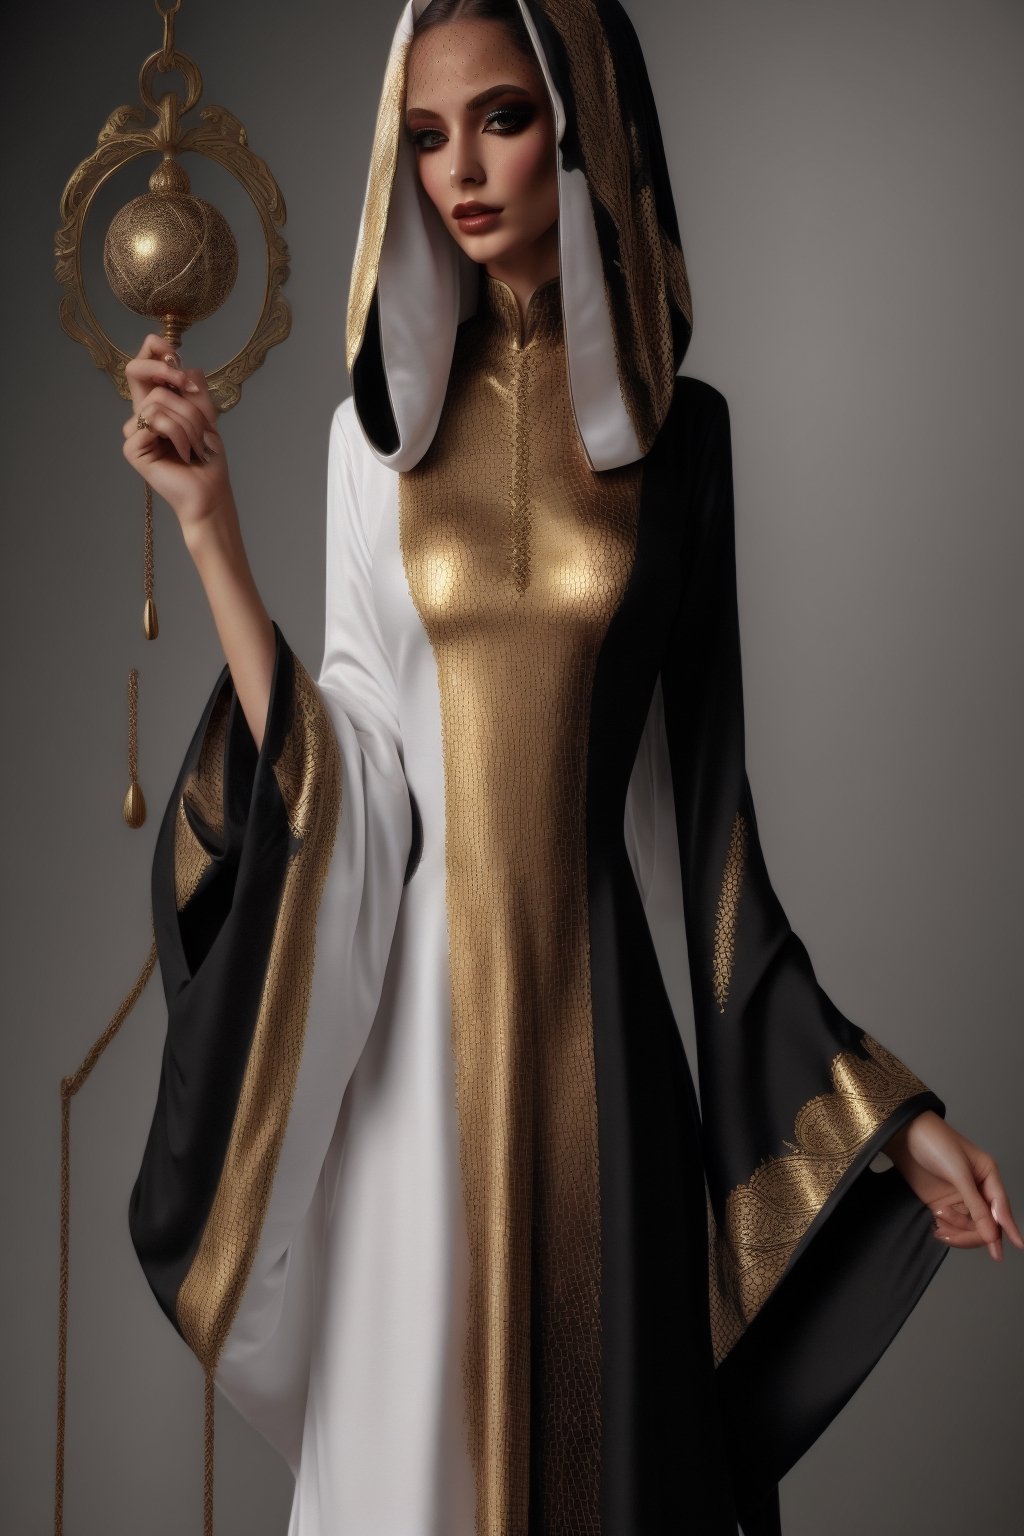 female sorceress mystic robes colored half black and half white with golden outlines fashion photoshoot